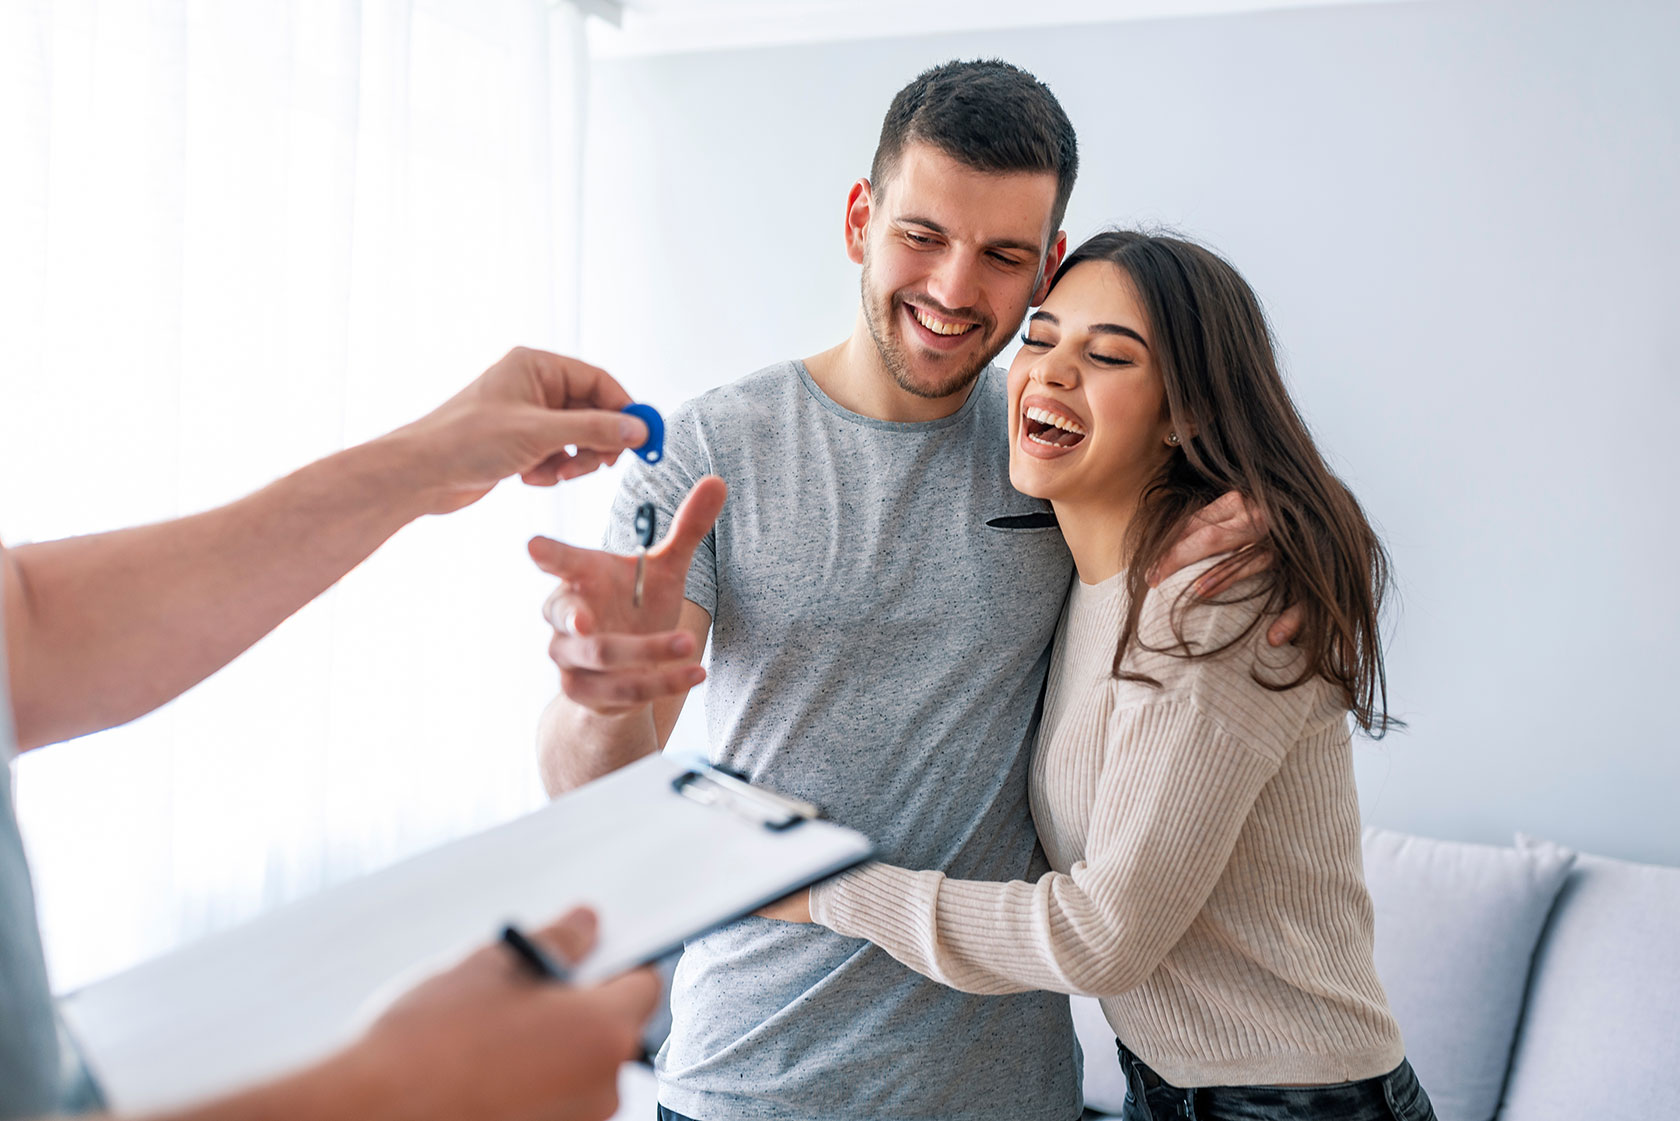 5 Real Estate Tips For Making Every Buyer A Happy Customer